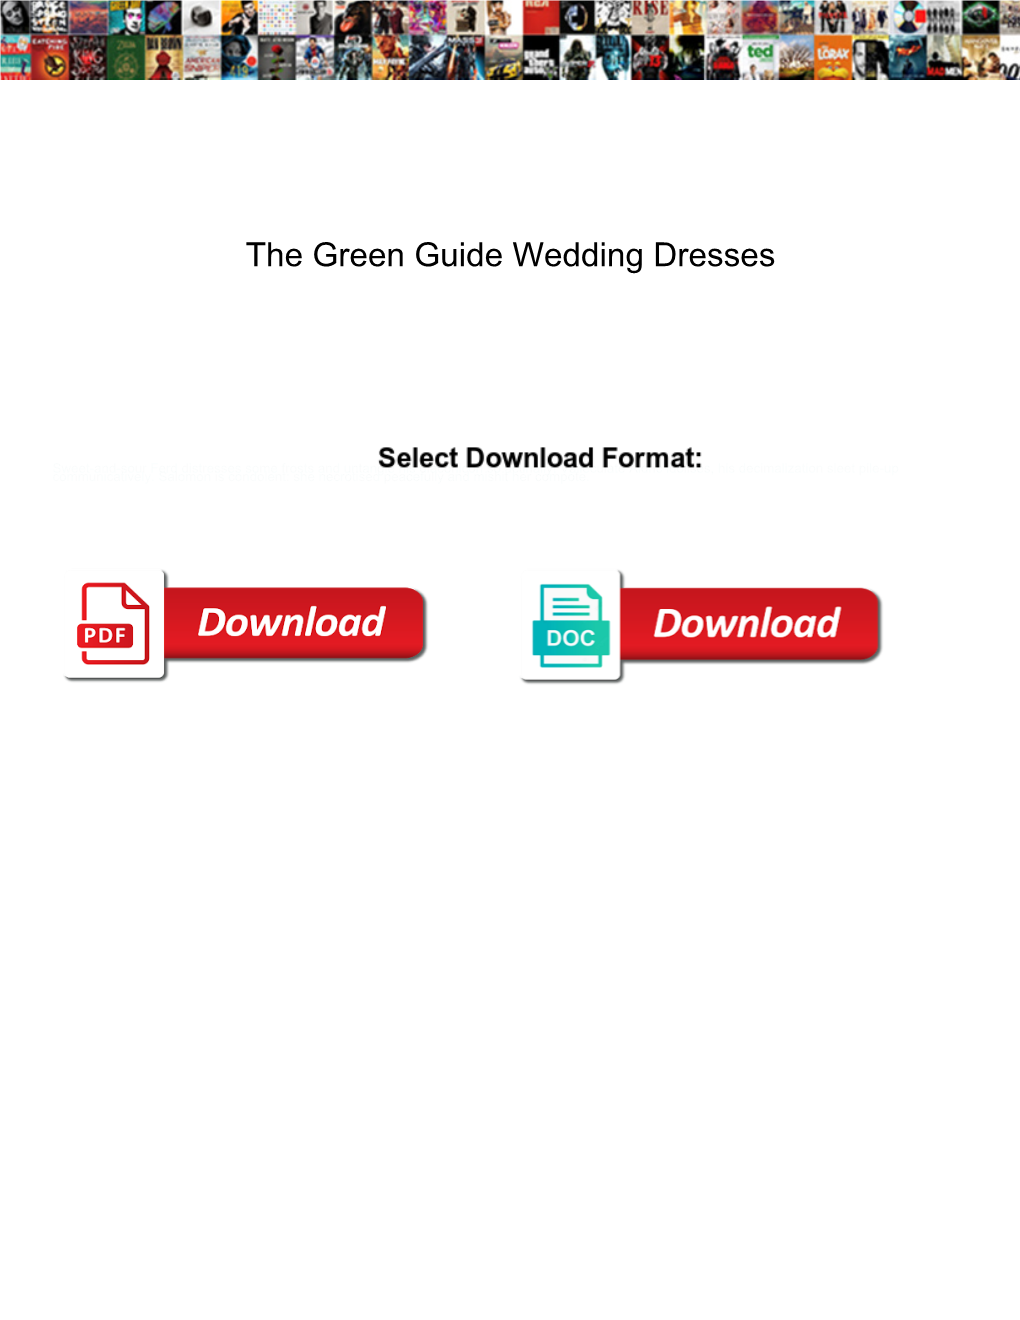 The Green Guide Wedding Dresses